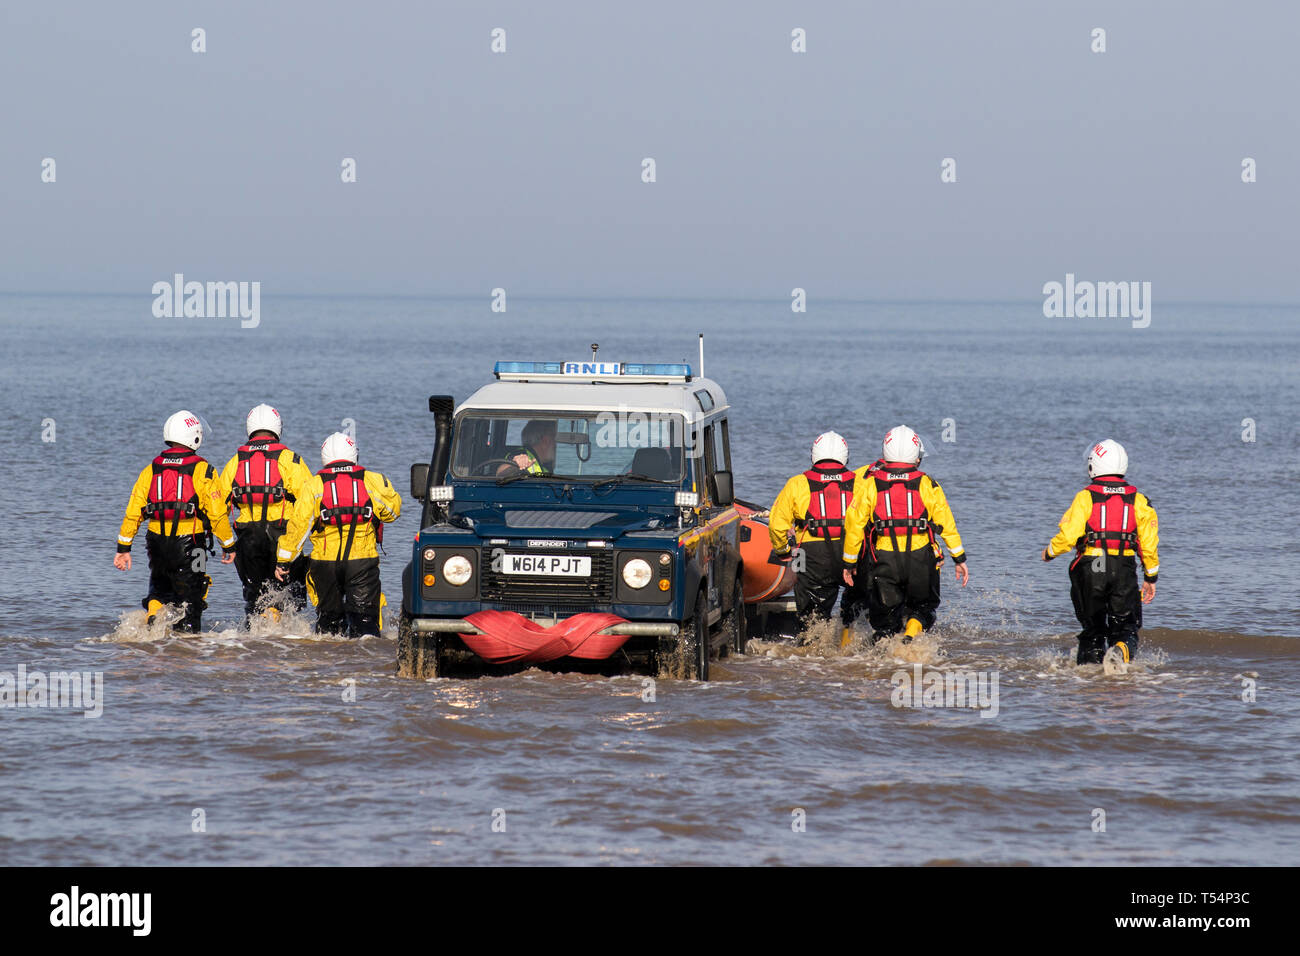 LifeGuard off-road beach & trail patrol rescue vehicle Land Rover rescue crew & boat launch in Blackpool, Lancashire. 21st April, 2019. UK Weather.  Lifeguards and lifeboat crew join forces, training exercises in the Irish Sea. Stock Photo